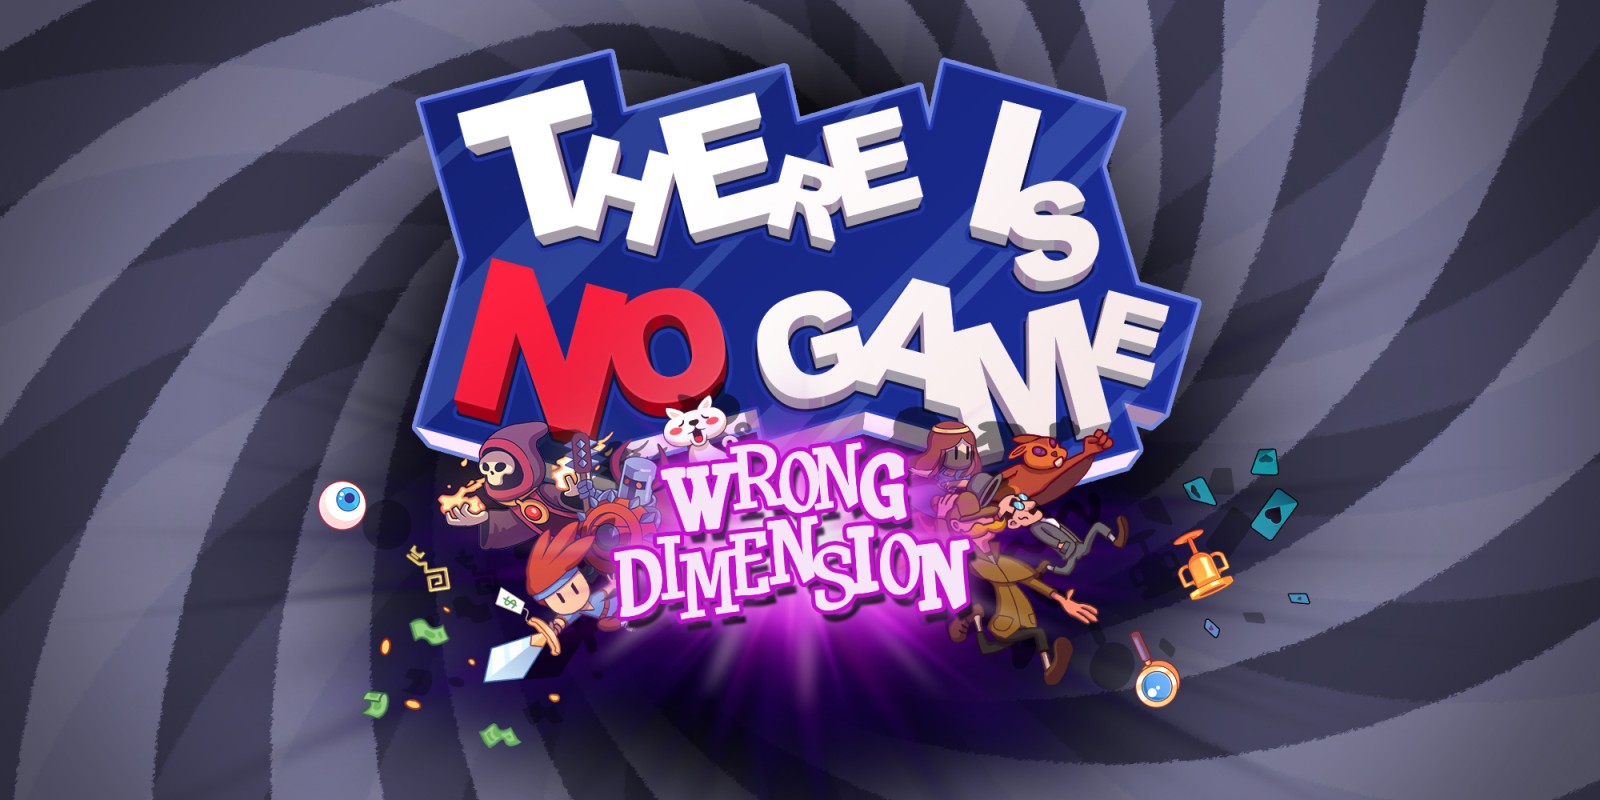 There Is No Game : Wrong Dimension APK Full Version Free Download (Oct 2021)